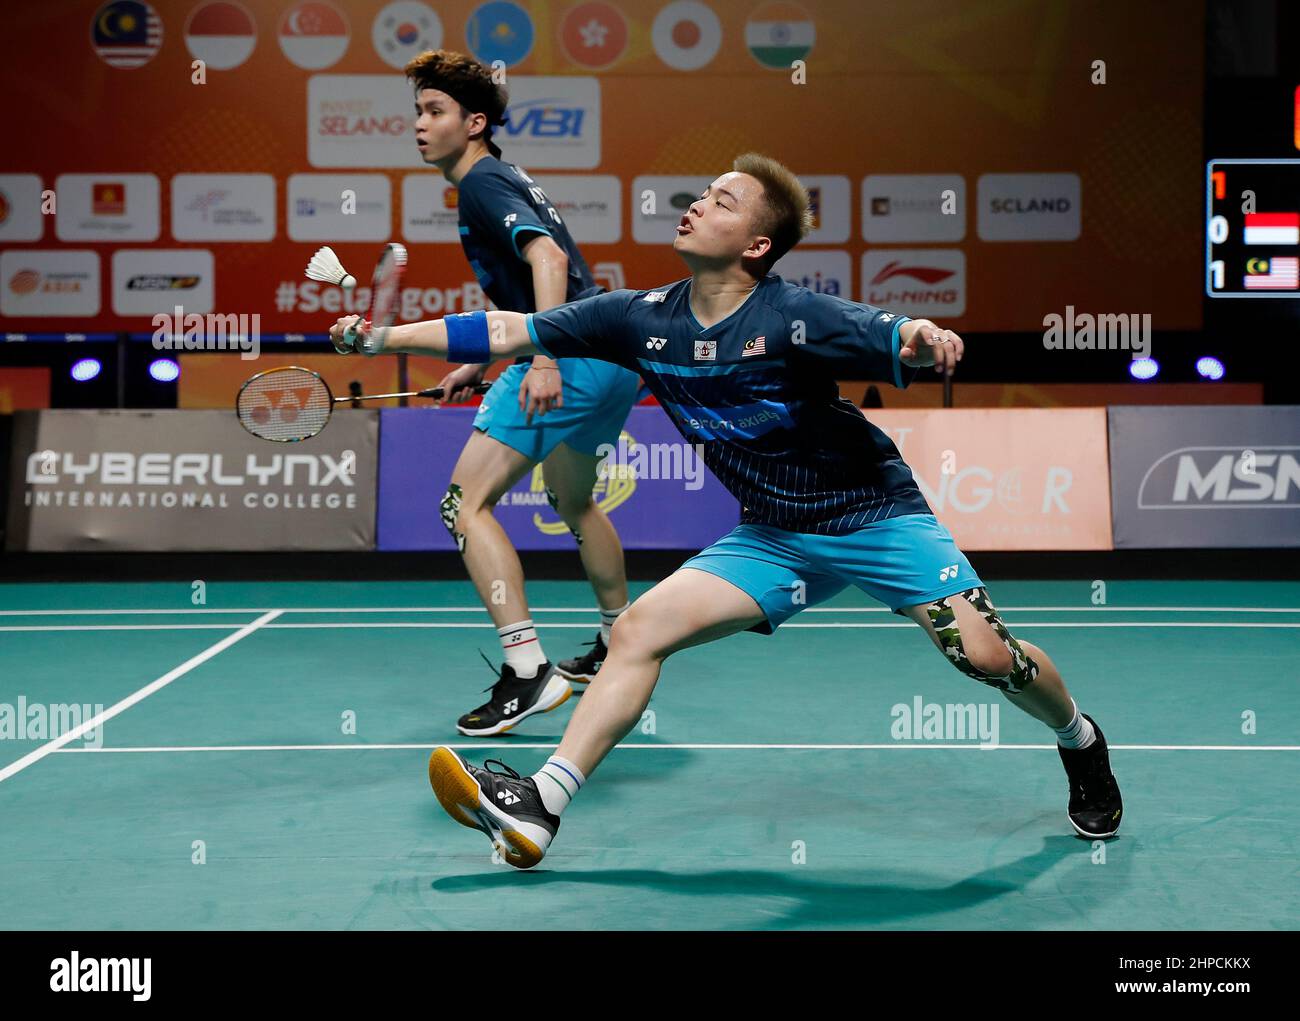 Kuala Lumpur, Malaysia. 20th Feb, 2022. Aaron Chia (R) and Soh Wooi Yik of  Malaysia play against Carnando Leo Rolly and Marthin Daniel of Indonesia  during the final of the team men's